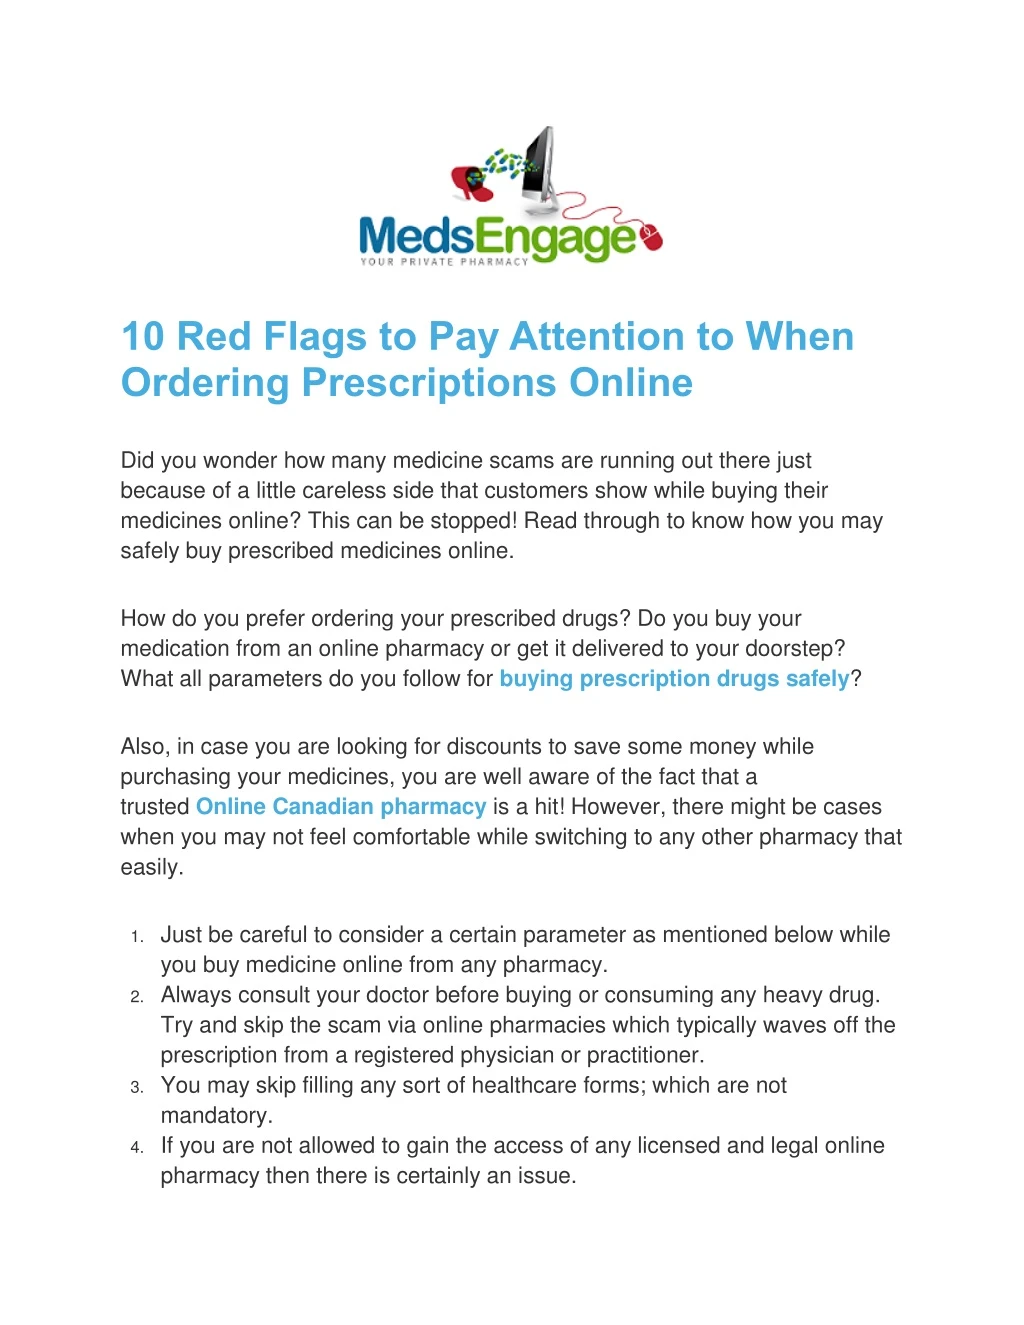 10 red flags to pay attention to when ordering